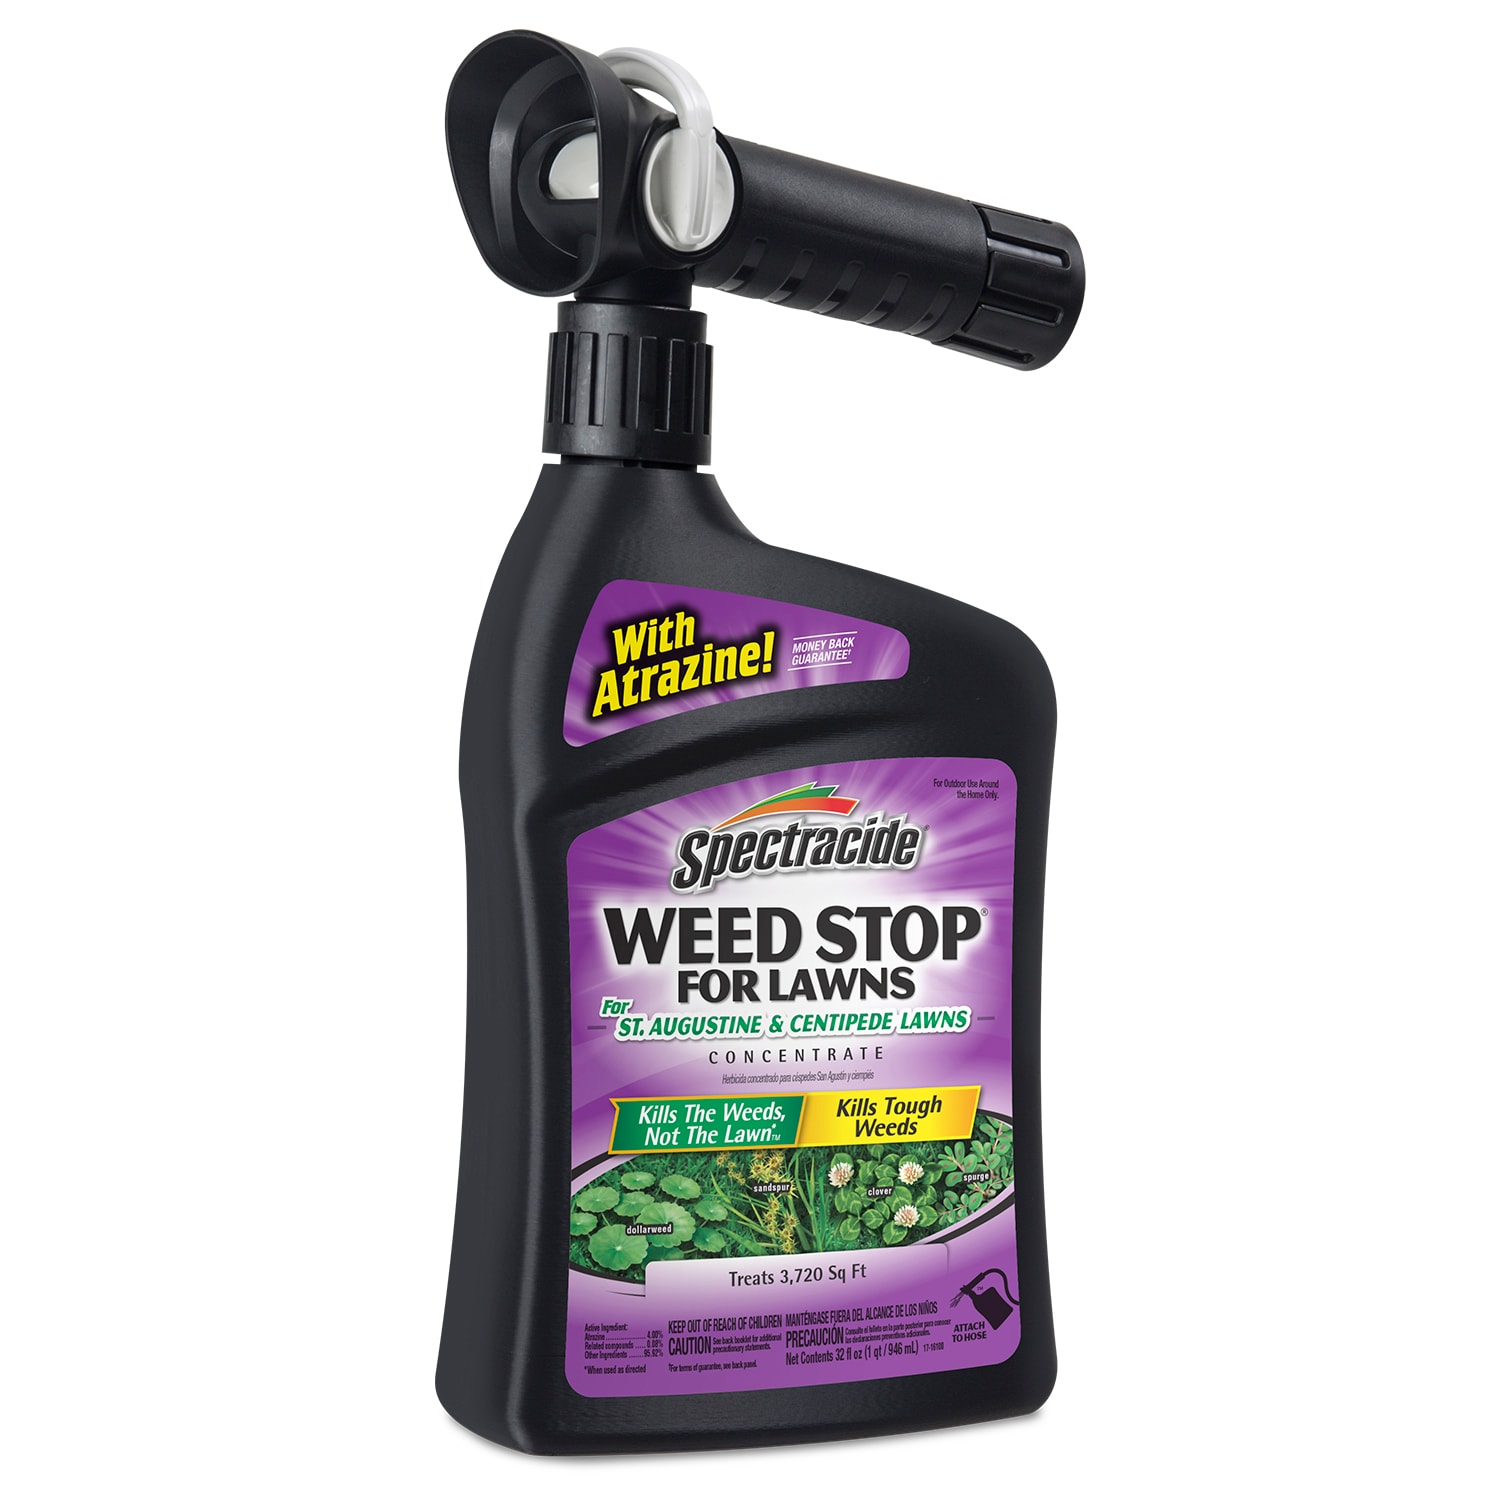 Lawns and in Centipede Weed Weed Spectracide St. Augustine Lawn Killer Stop Sprayer department for Killers Hose End the at Weed 32-oz